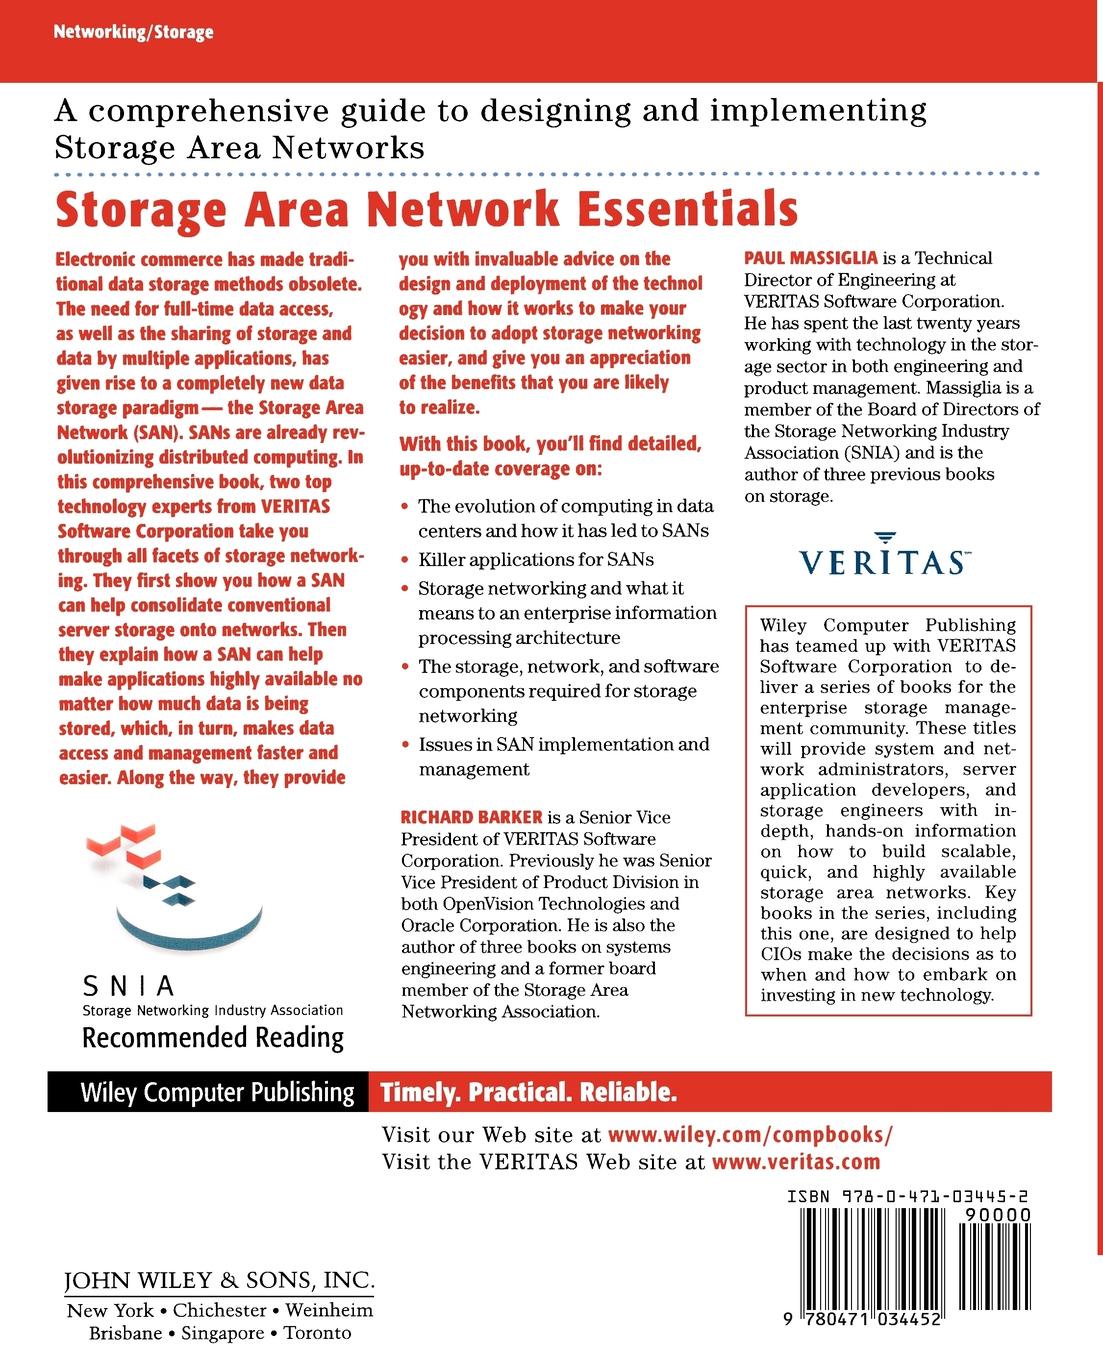 Storage Networking Essentials. A Complete Guide to Understanding & Implementing Sans